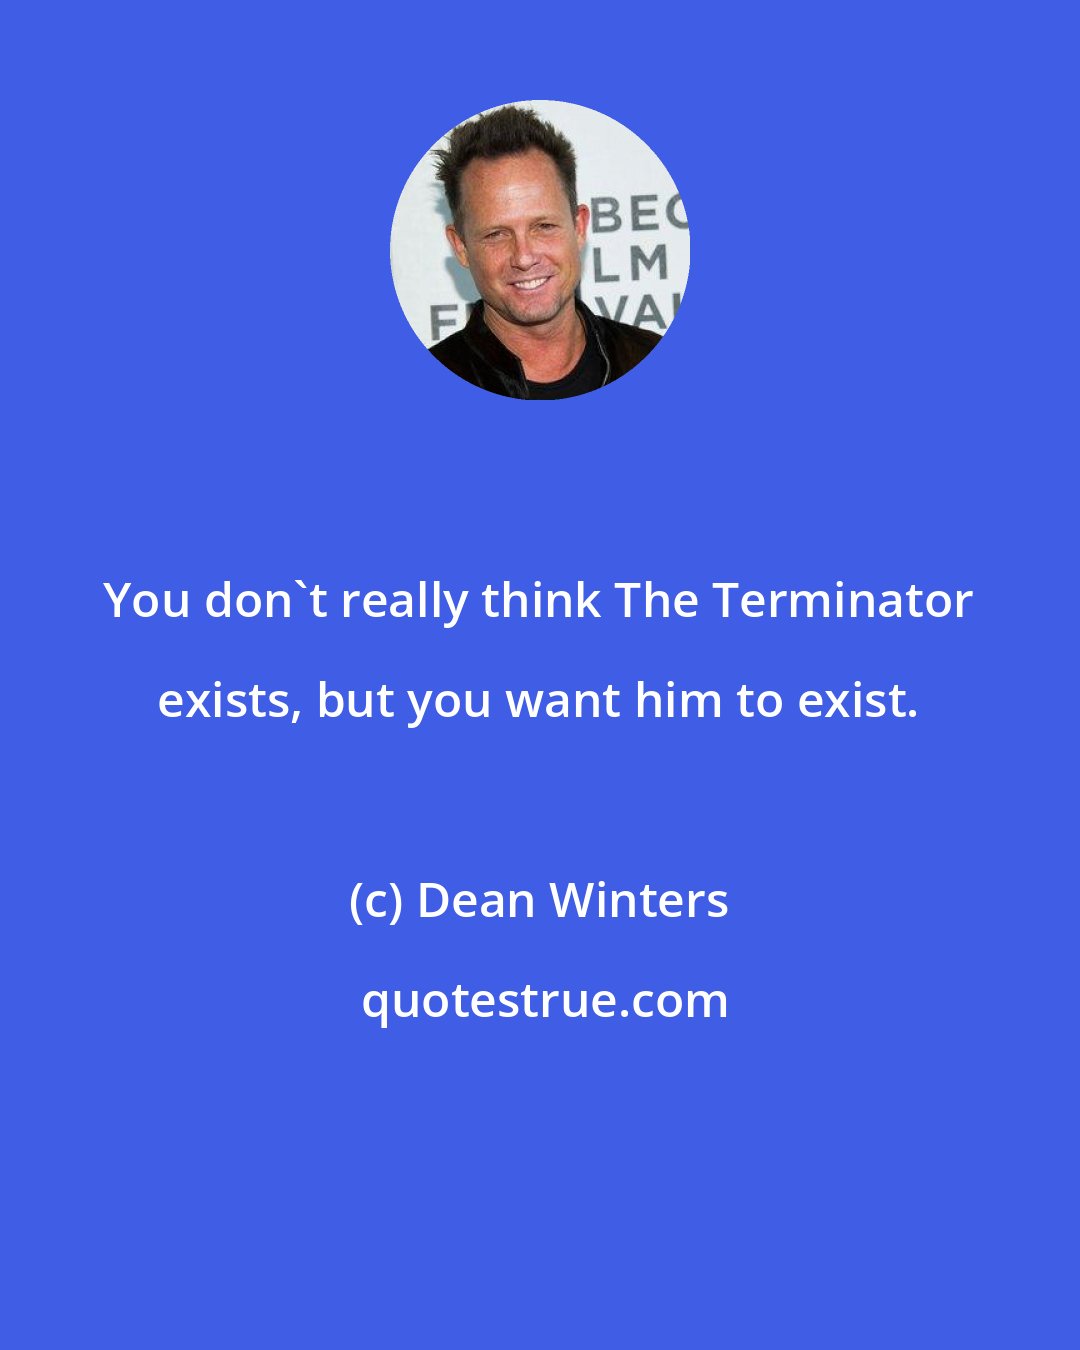 Dean Winters: You don't really think The Terminator exists, but you want him to exist.